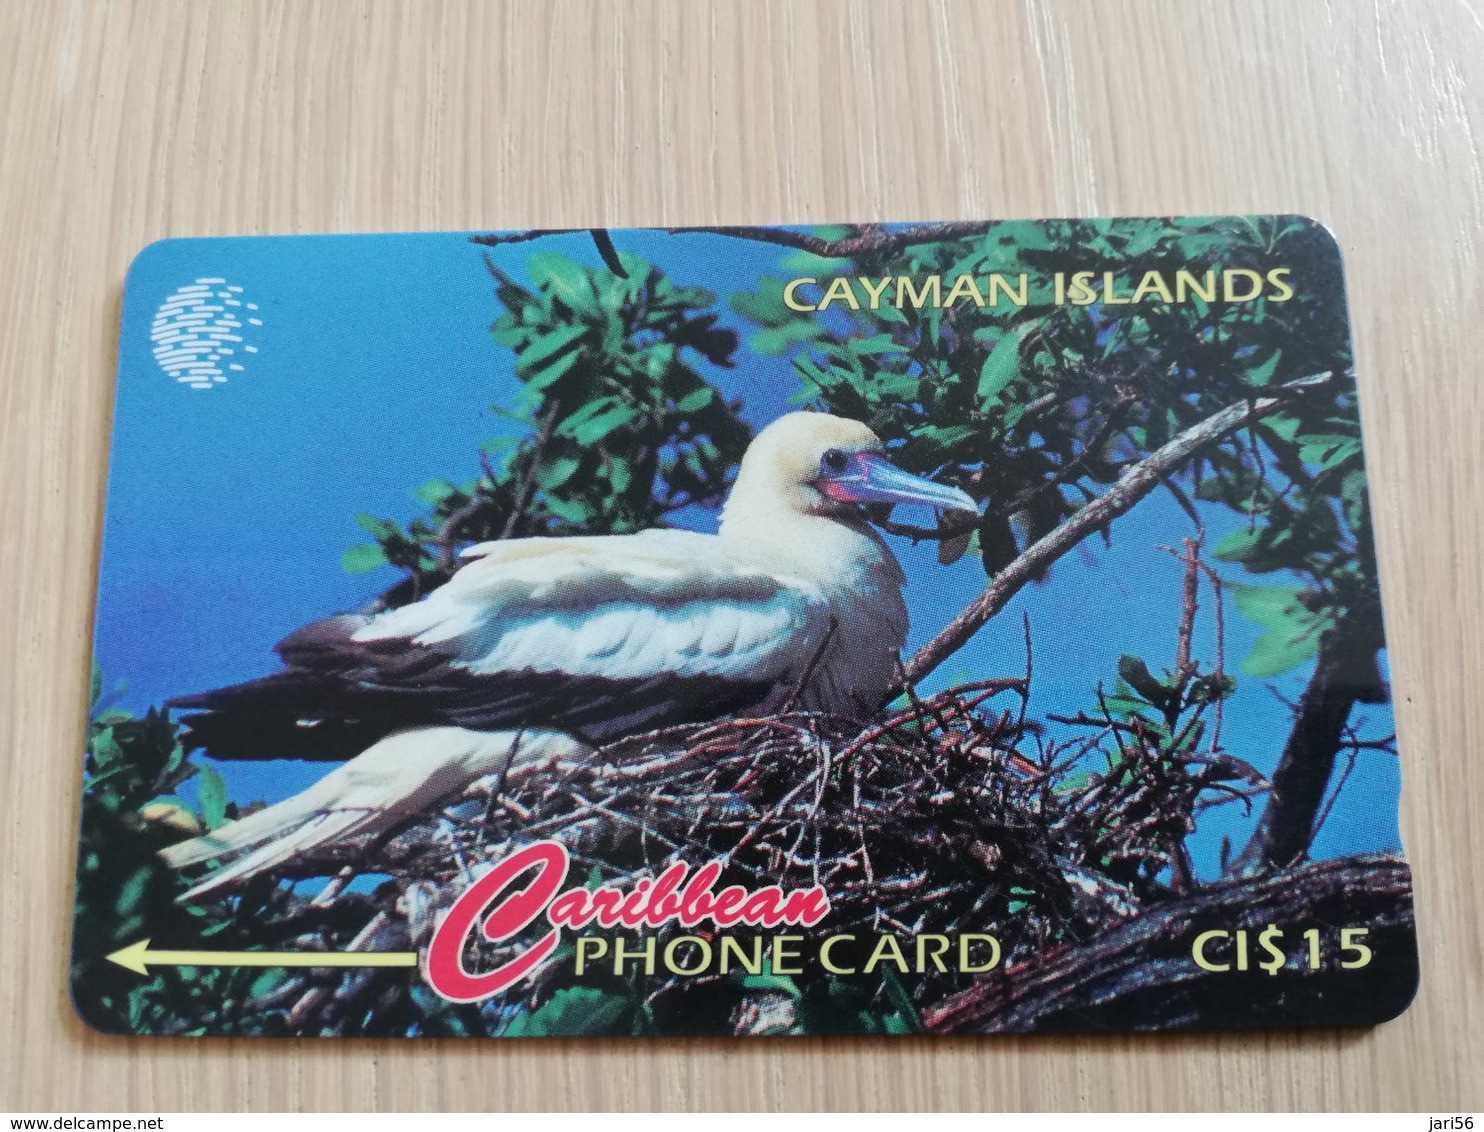 CAYMAN ISLANDS  CI $ 10,-  CAY-11D  CONTROL NR 11CCID  RED FOOTED BOOBY      NEW  LOGO     Fine Used Card  ** 3085** - Kaimaninseln (Cayman I.)